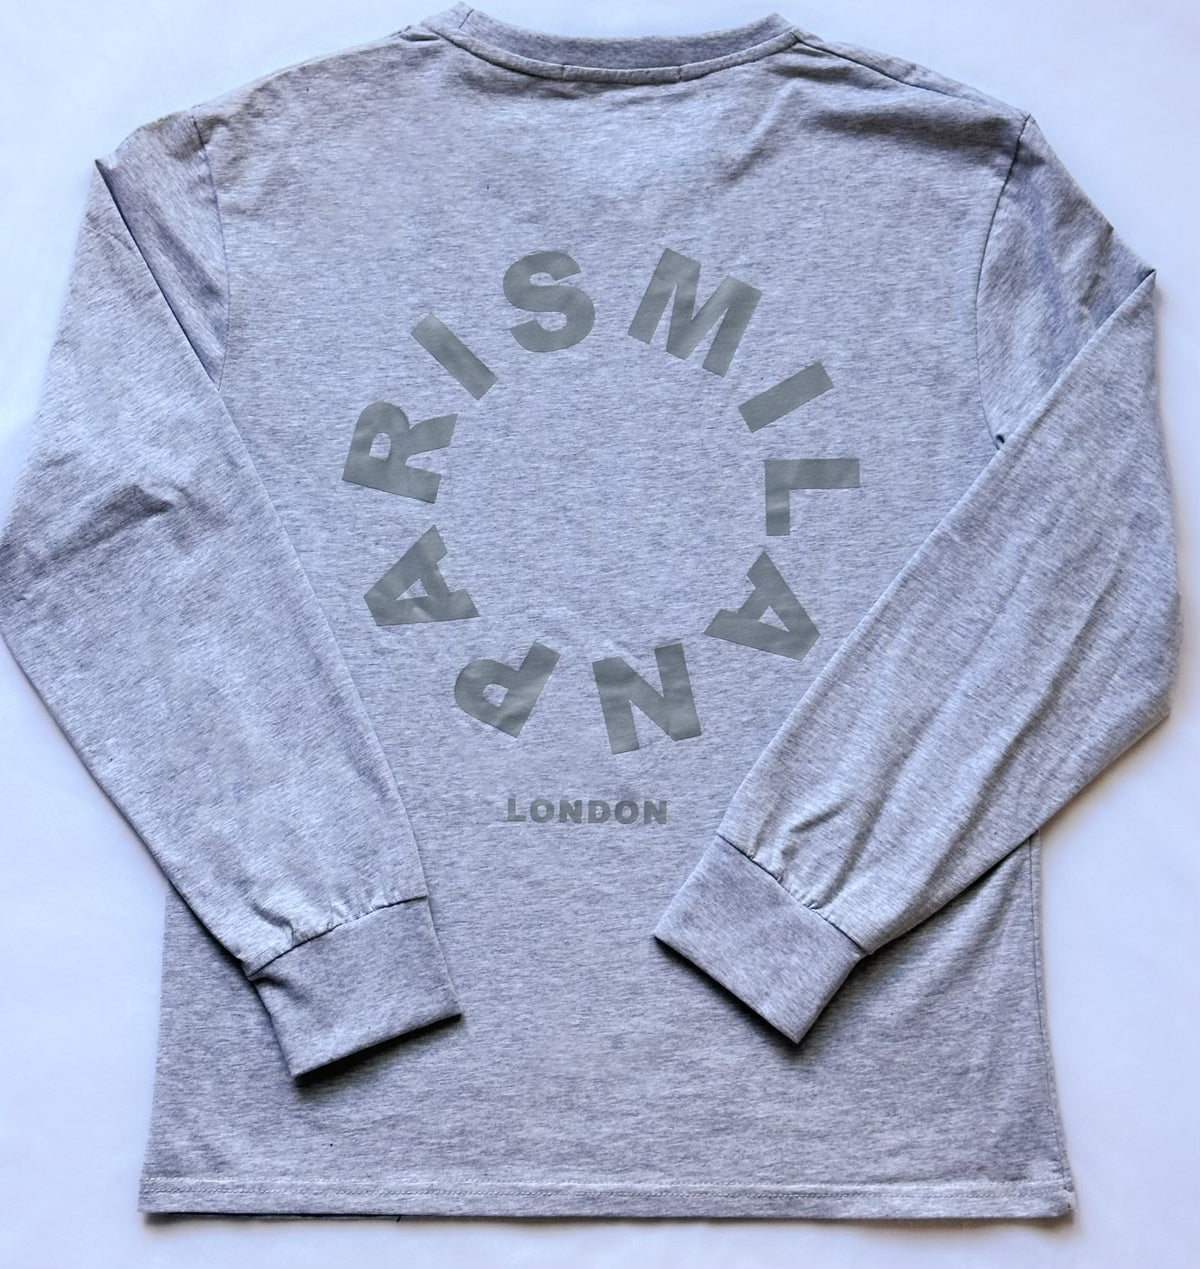 Thin Grey Print Graphic Tee (design on the back and front of tee)